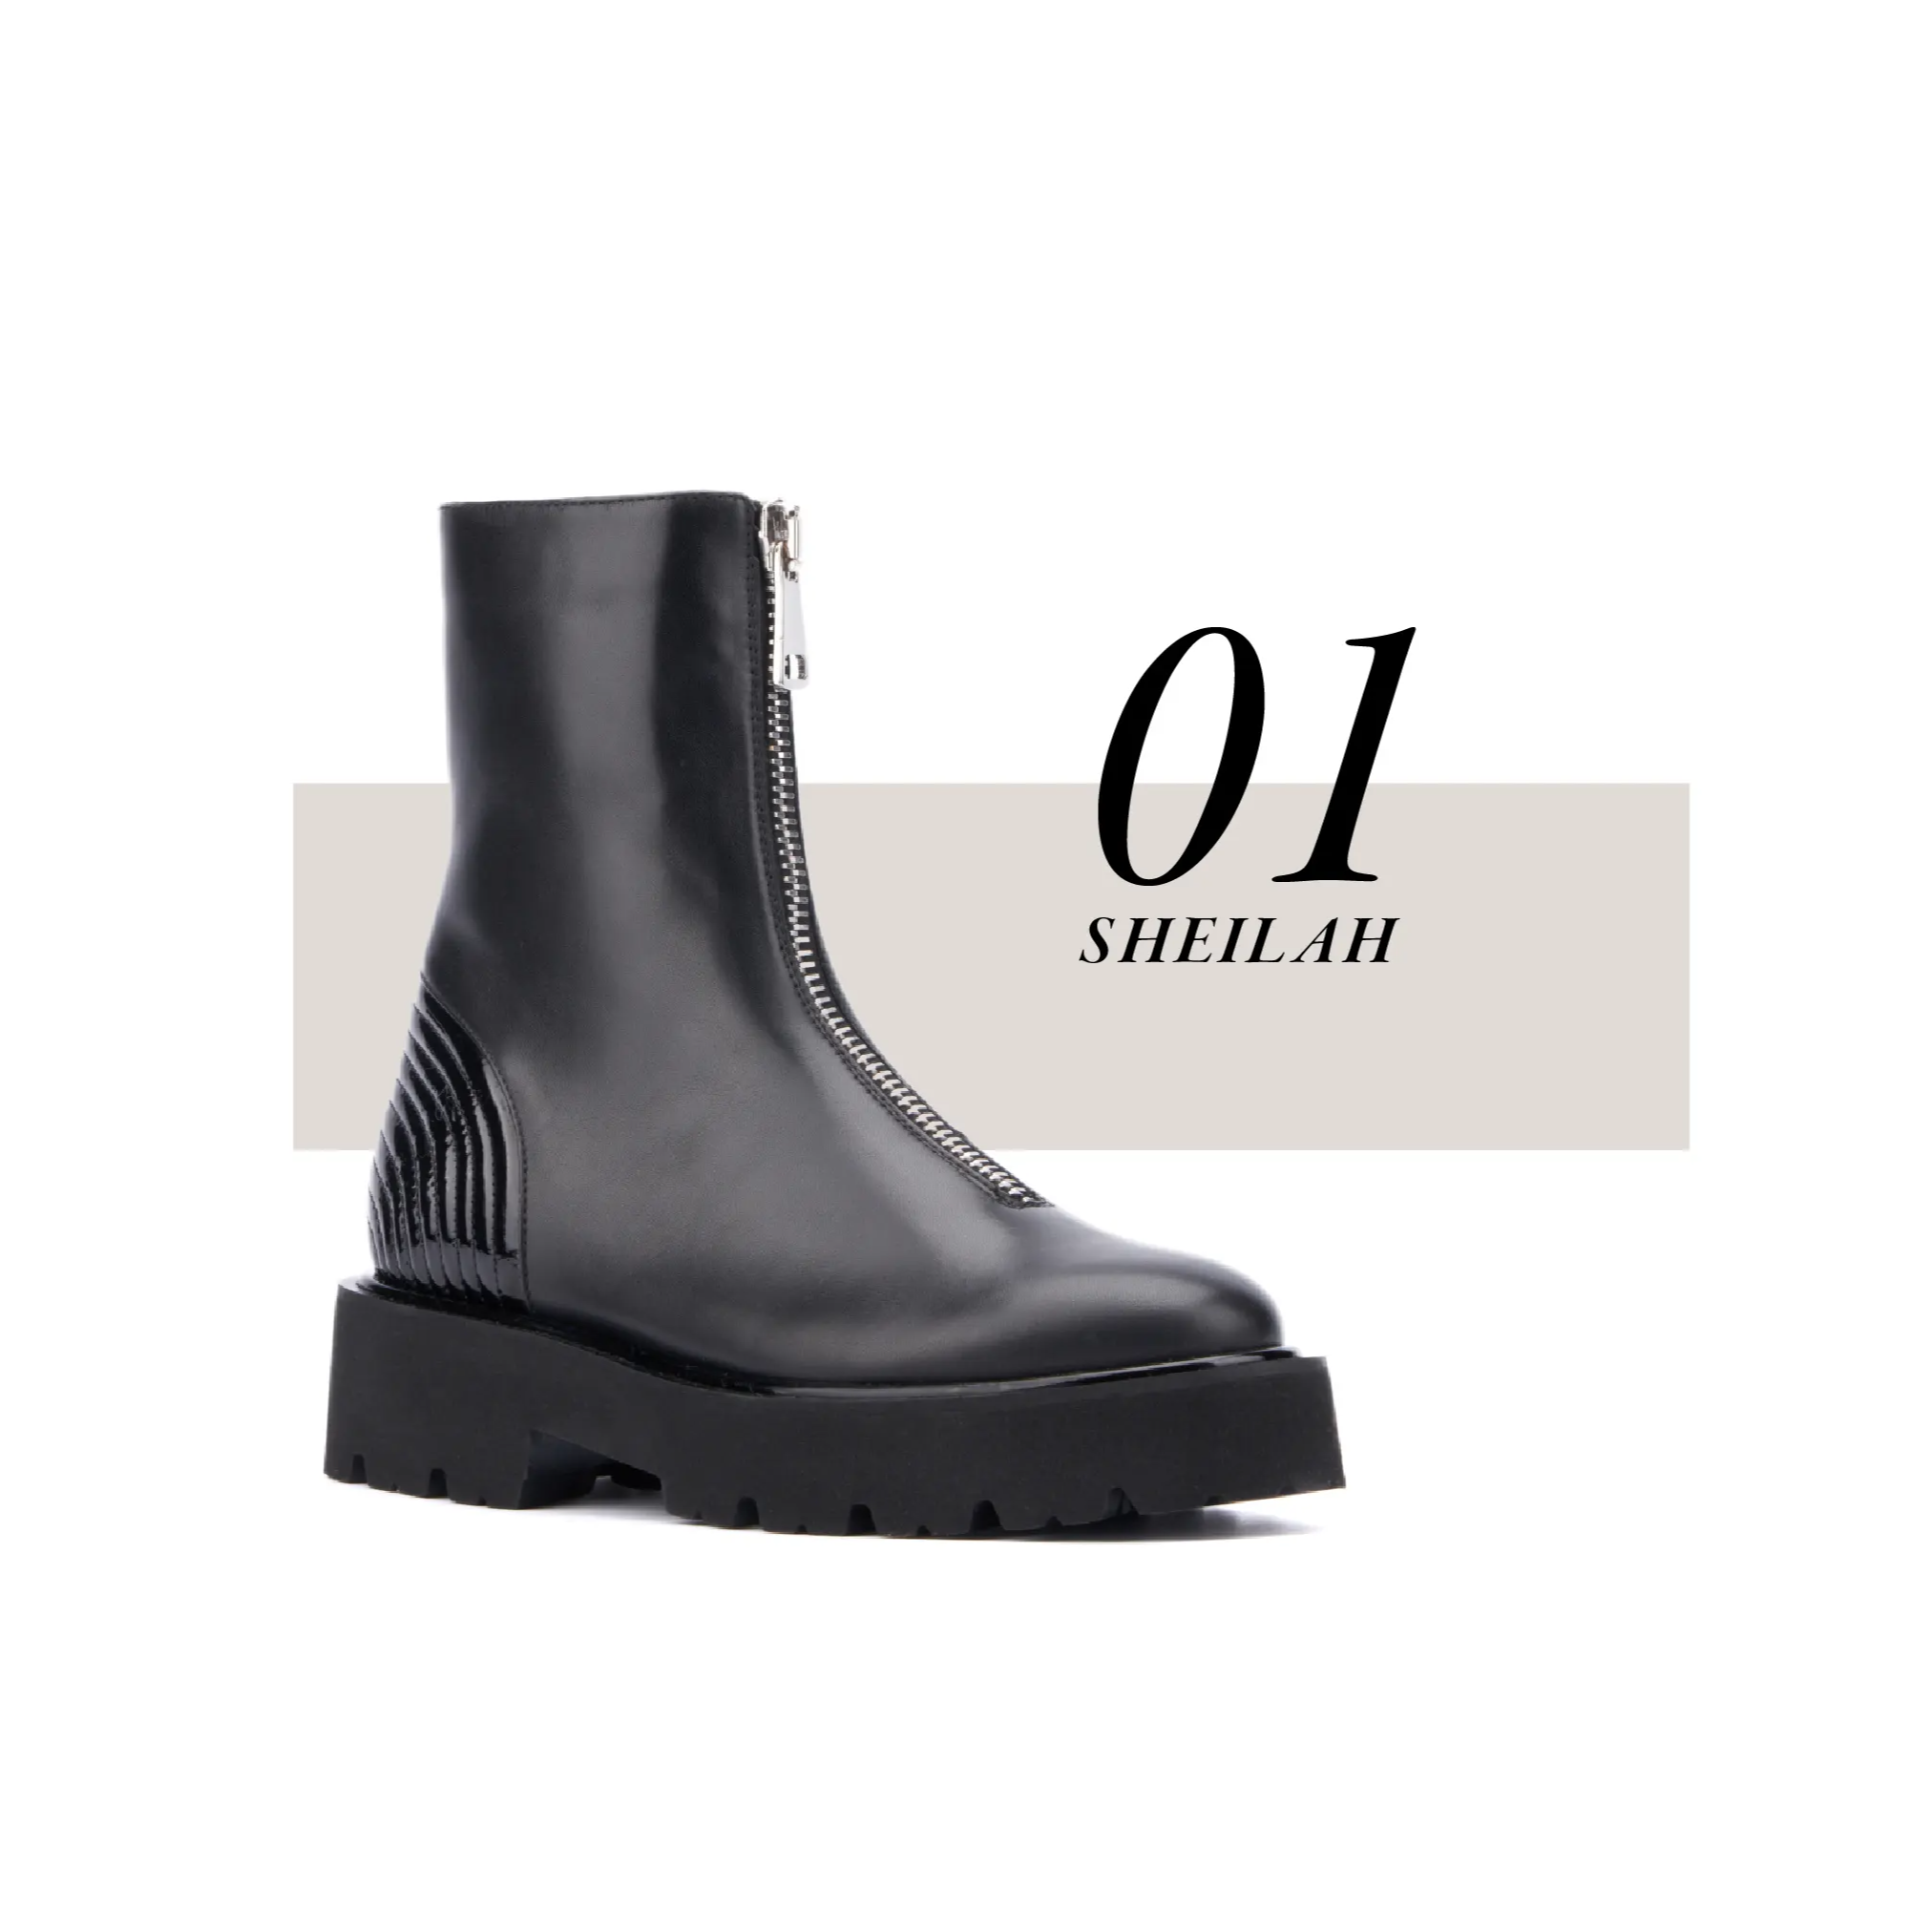 1: The Sheilah boot in Black